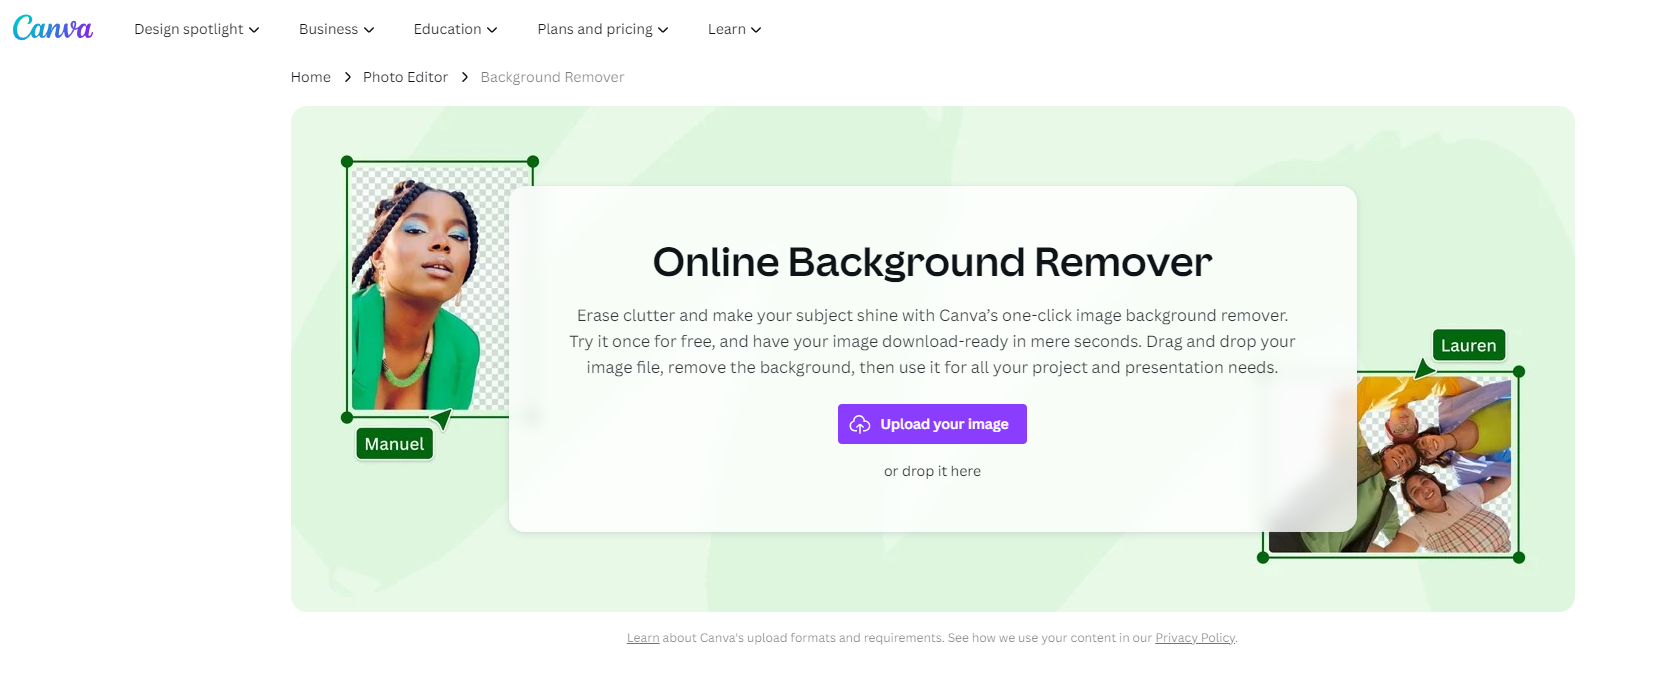 Canva online background removal tool